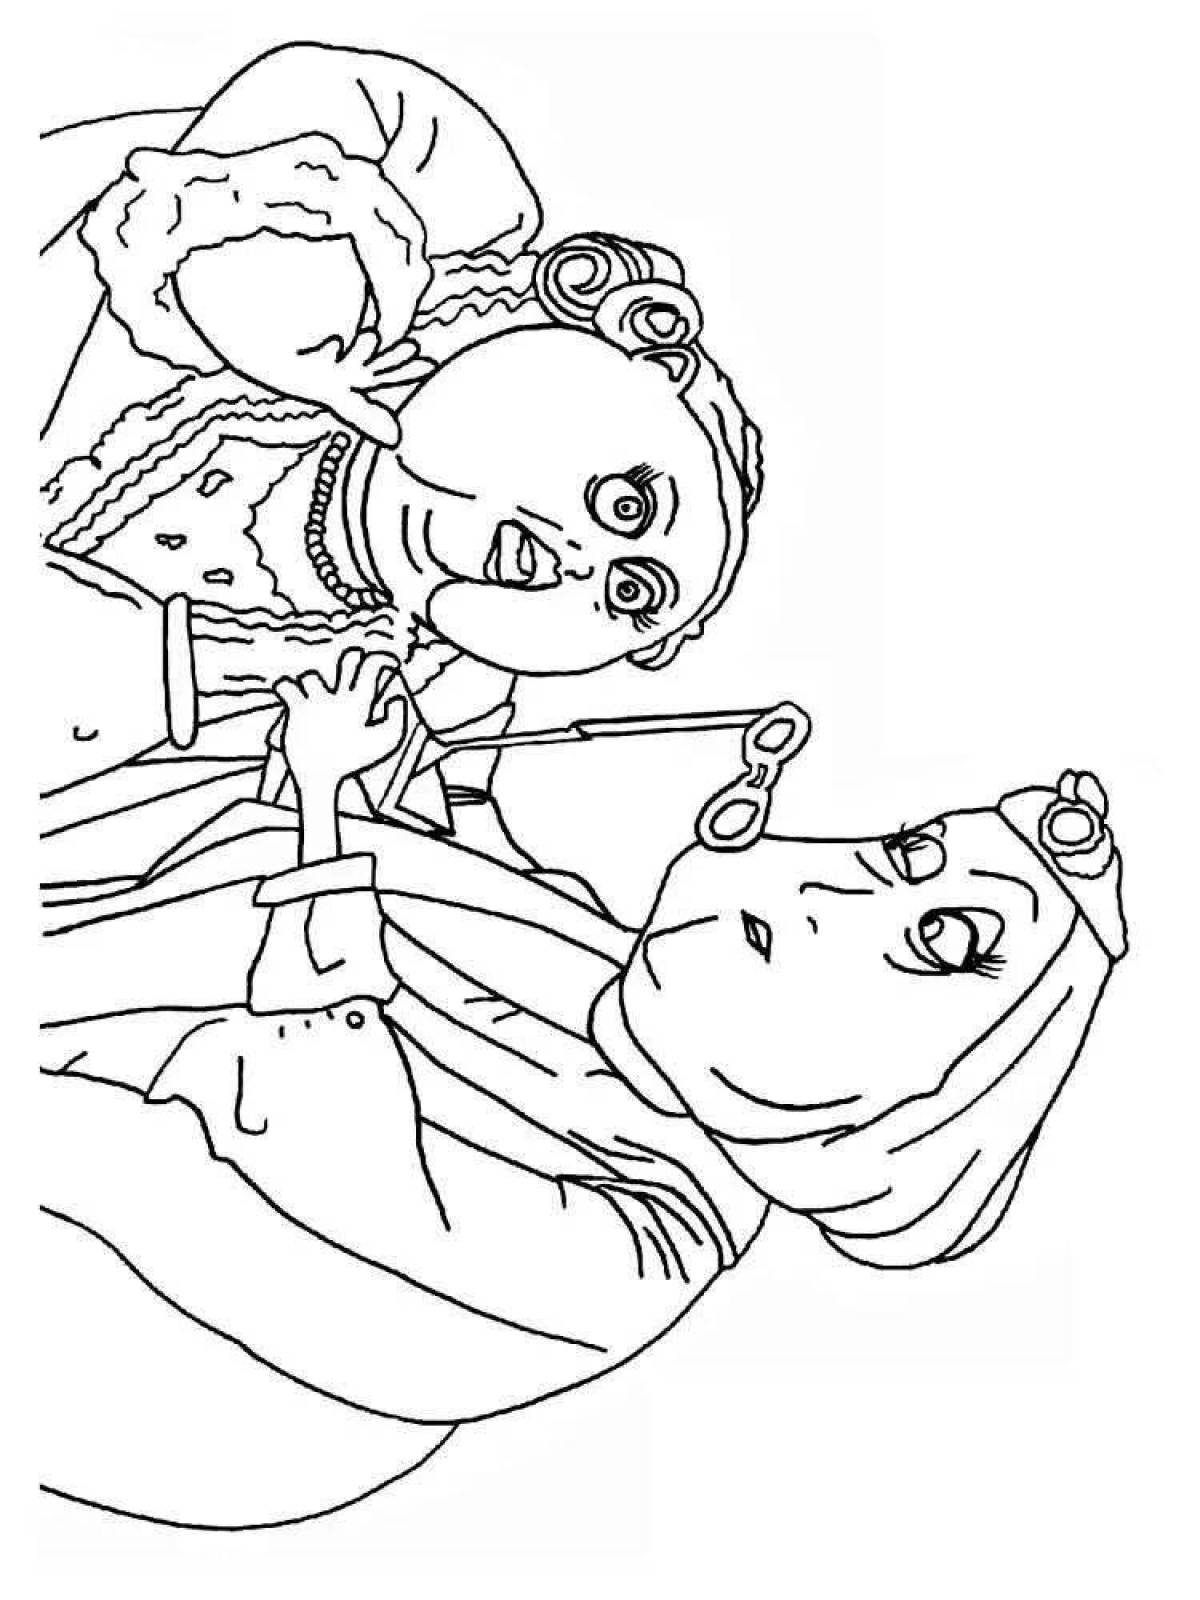 Coraline Living Coloring Page